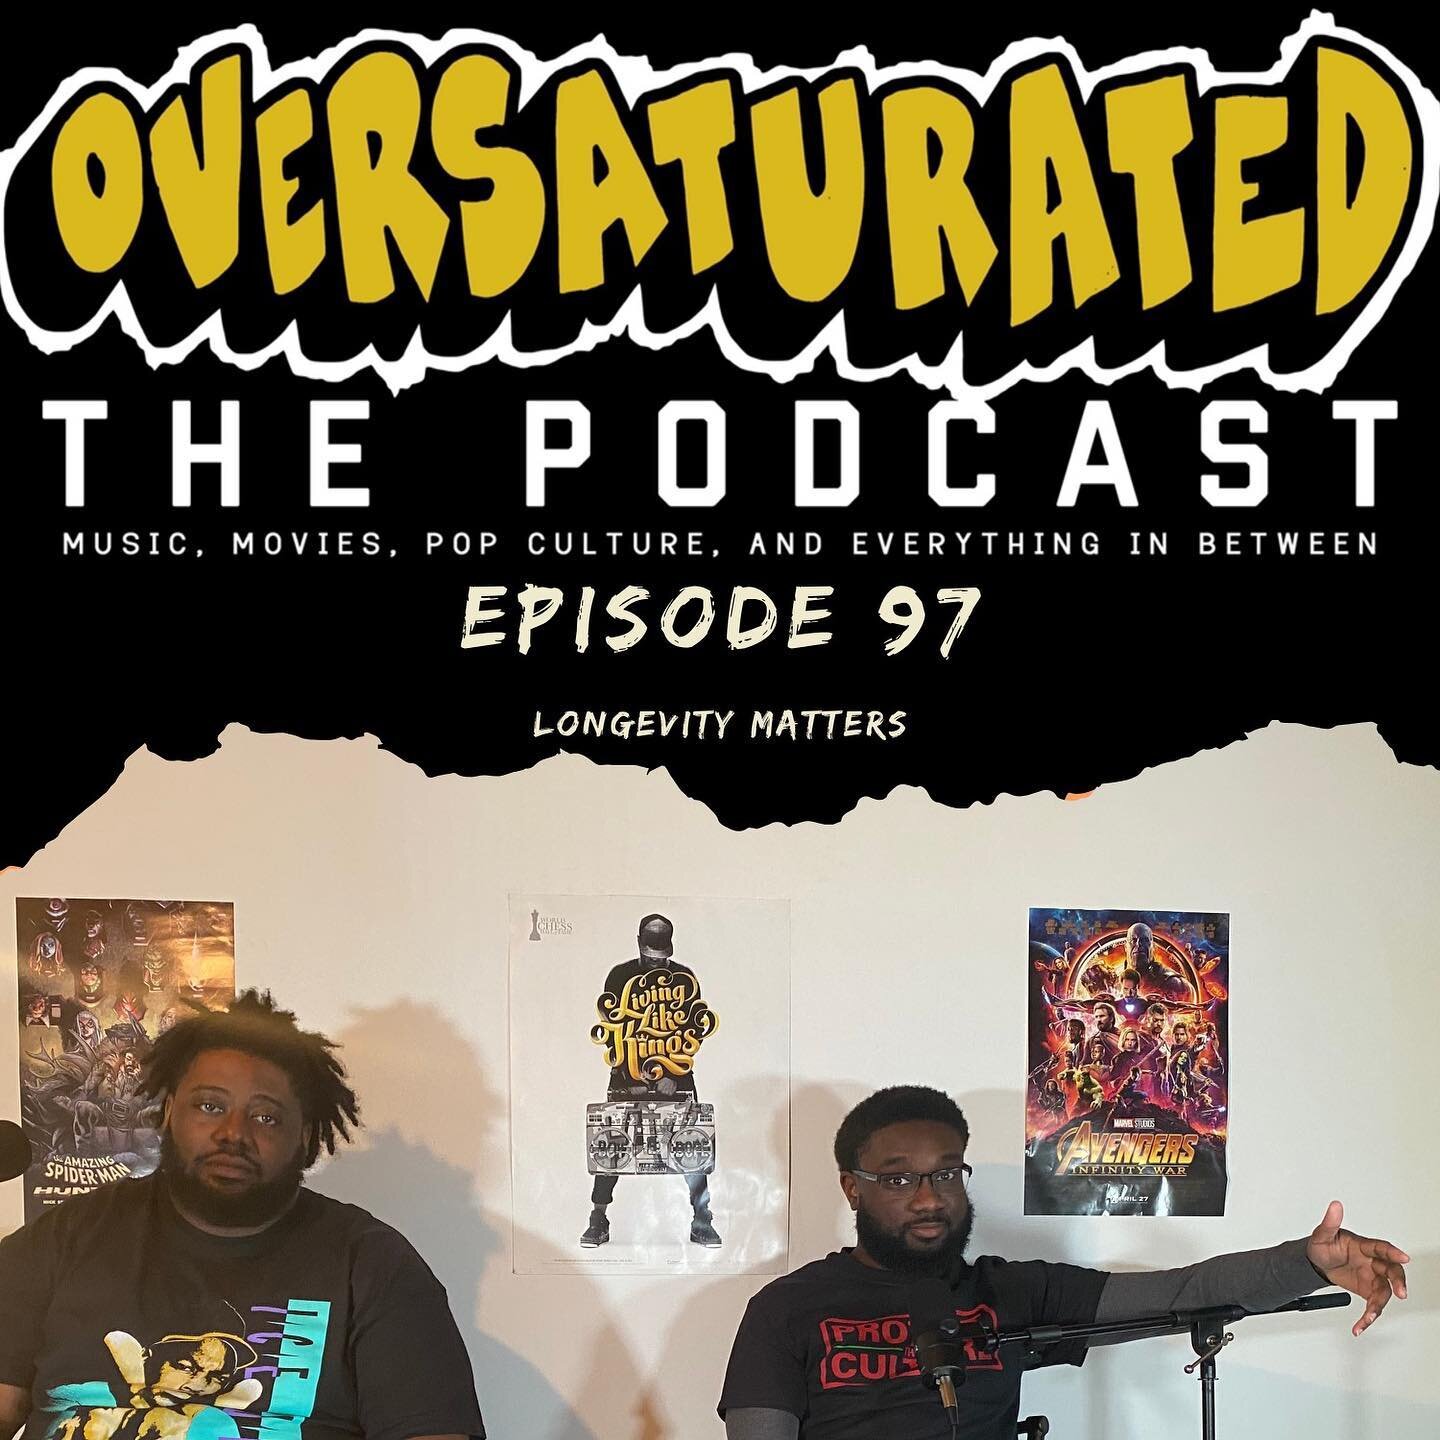 Episode 97 - Longevity Matters. The guys are back with a great list of topics this week. 
.

https://linktr.ee/oversatthepodcast
.
Look out for #OFFTheDome 

-D'Angelo Verzuz Recap
-Vanessa Bryant Responds to Meek Mill
-Lebron Wants To Make a Rap Alb